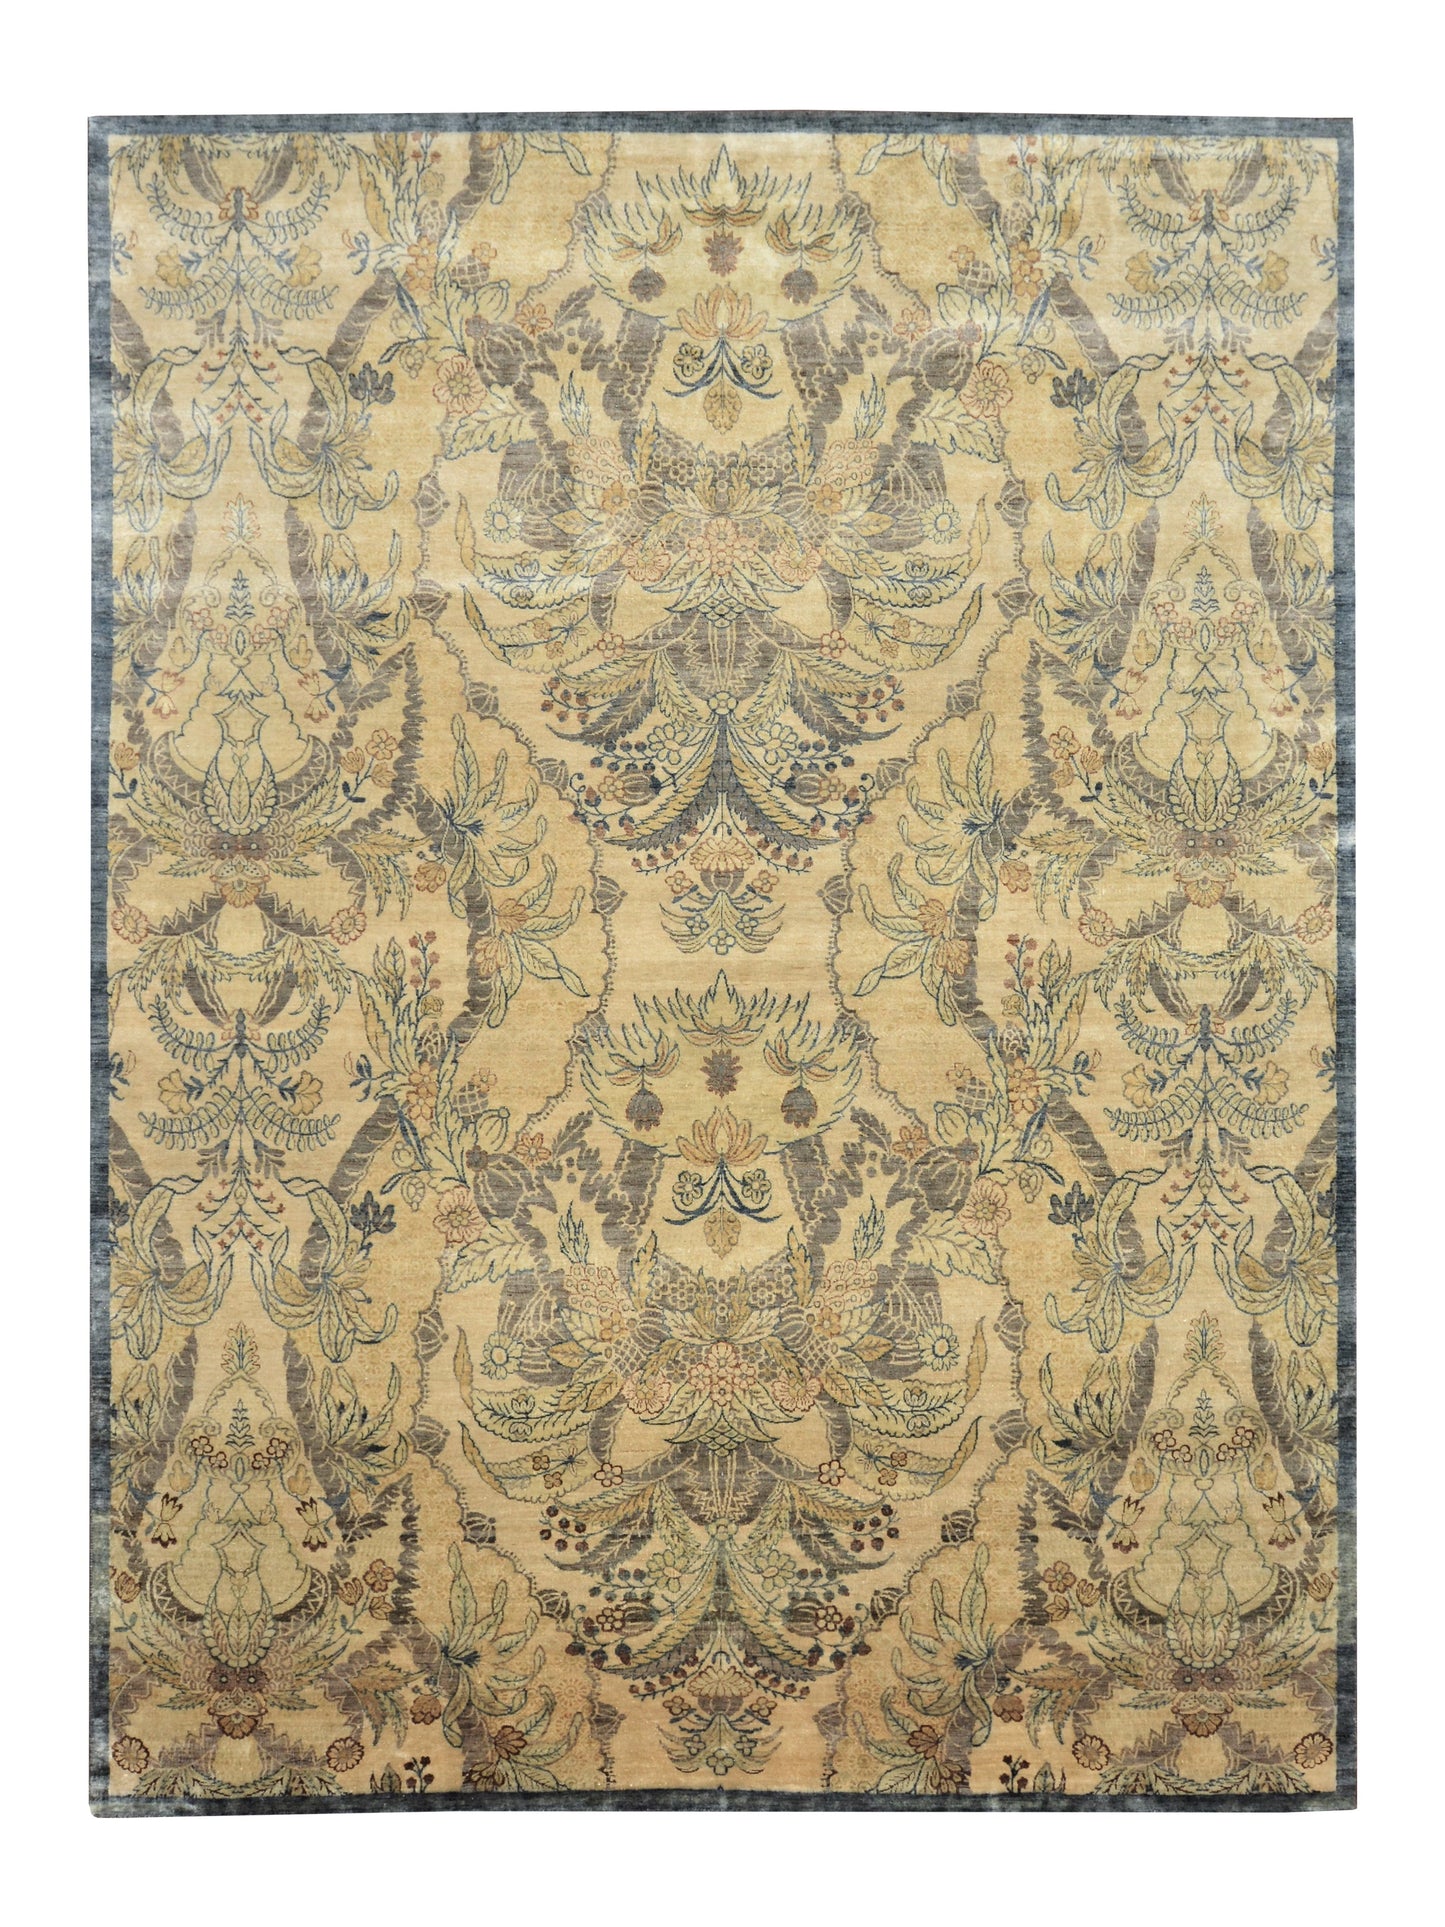 Get trendy with L.Gold and Charcoal Pure Silk Transitional Handknotted Area Rug 8.11x11.11ft 271x367Cms - Contemporary Rugs available at Jaipur Oriental Rugs. Grab yours for $12750.20 today!